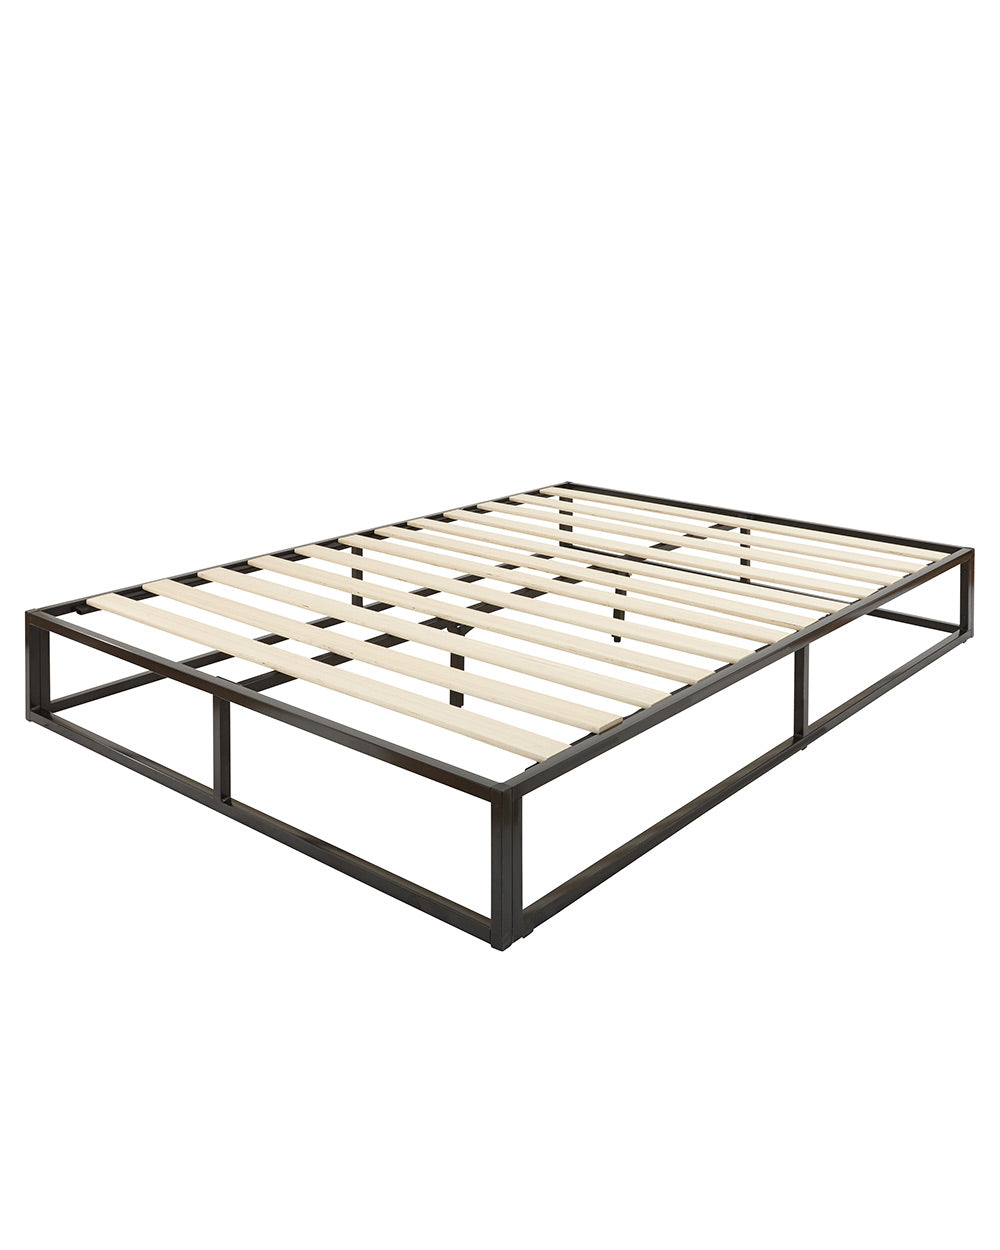 small double bed frame black industrial platform bed white cut out image close up of the black frame